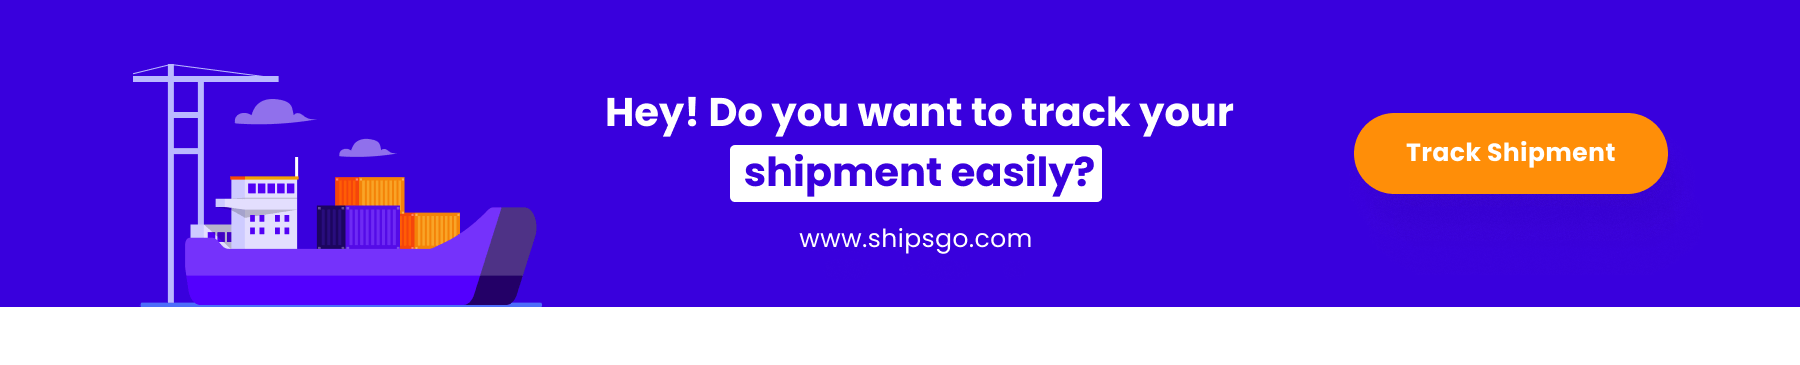 Easily Shipment Tracking with Shipsgo